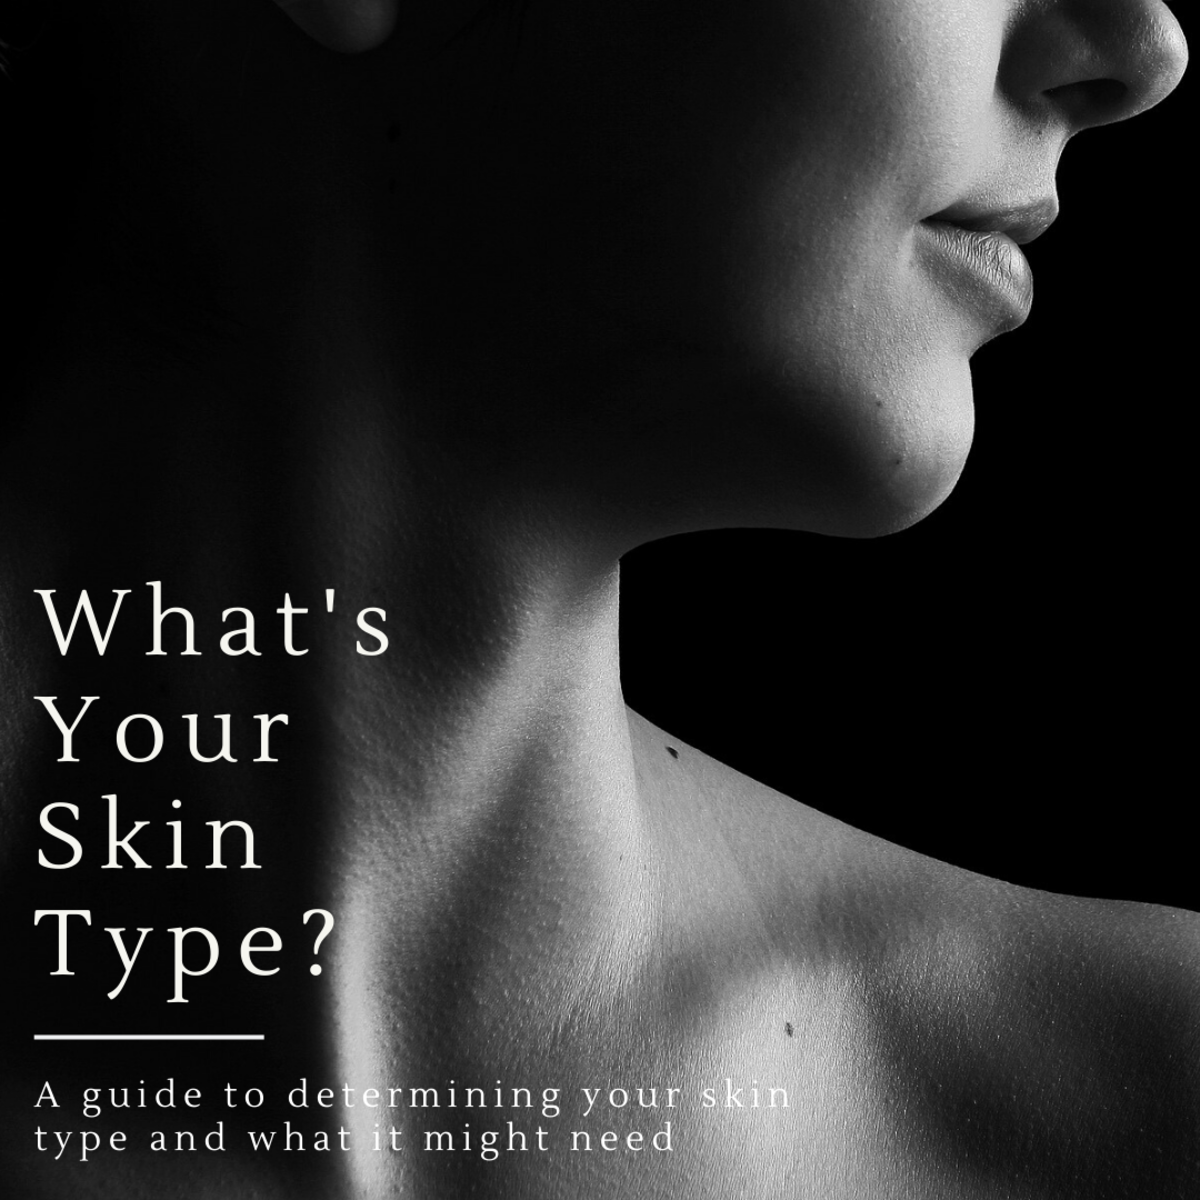 How to Determine Your Skin Type